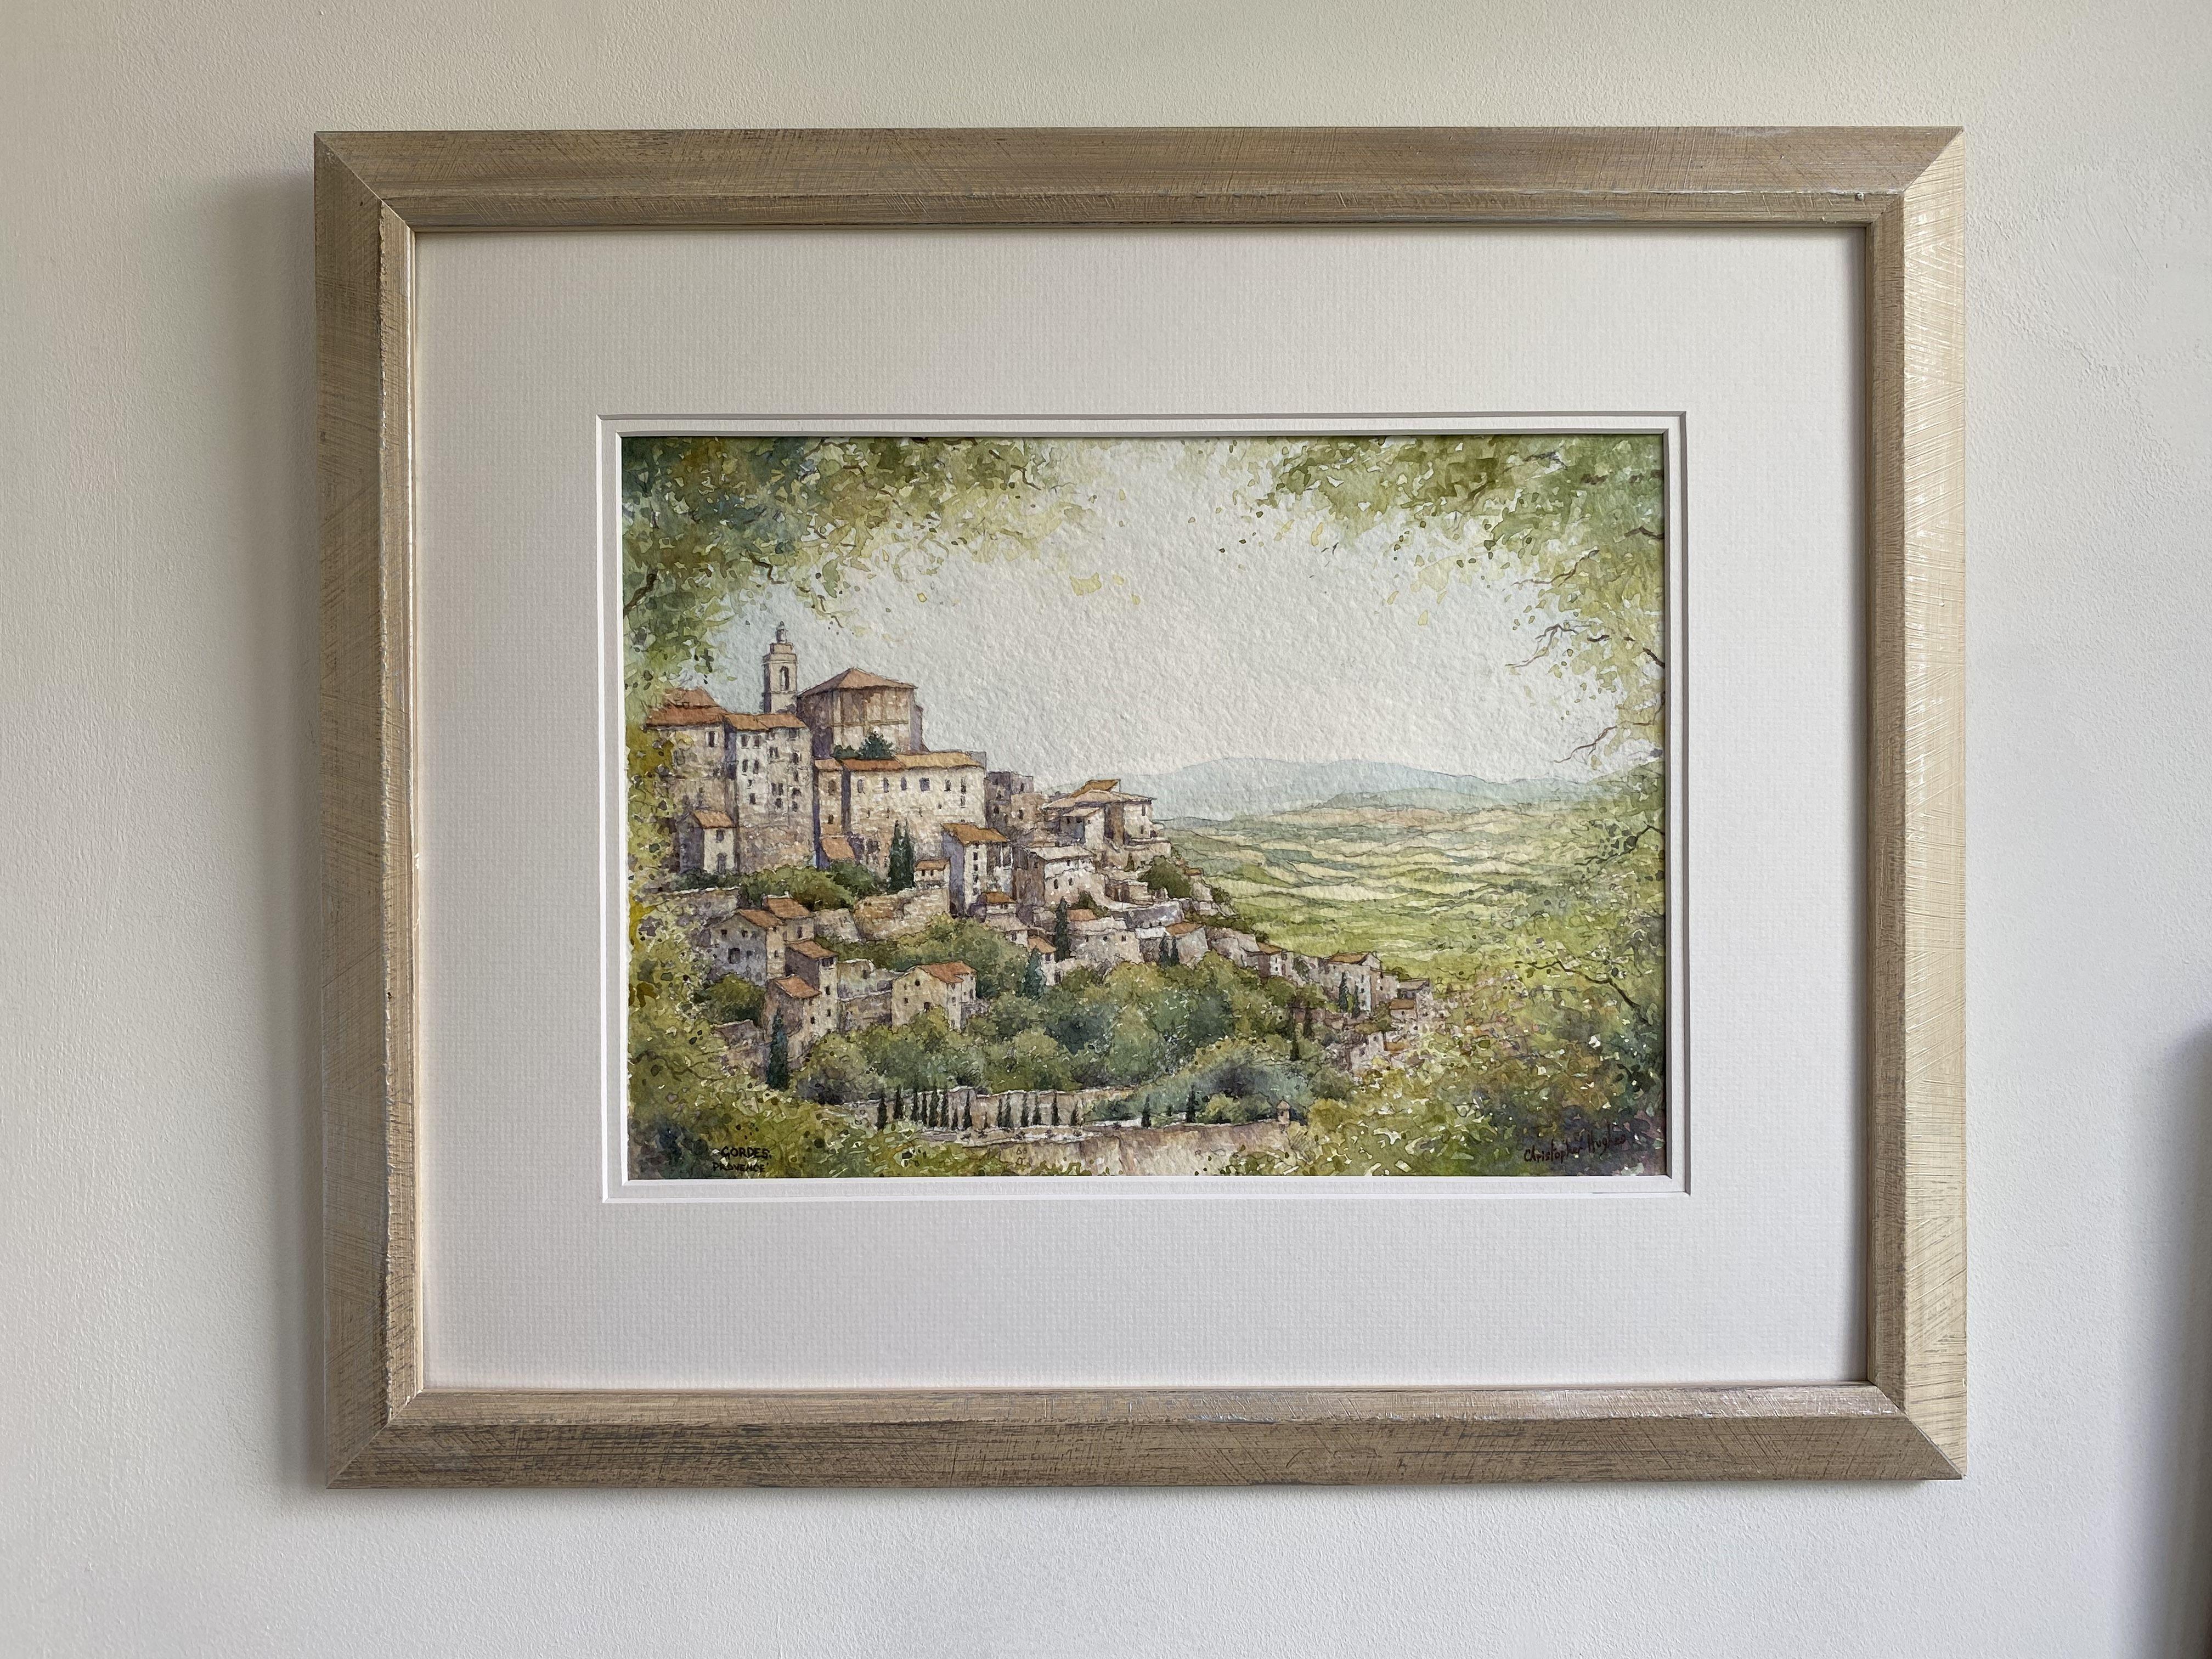 Gordes. Provence. France . Stunning hilltop French village.  Original watercolour on 300lb handmade 100% rag paper.  14 in x 10 in, presented in a double white bevel cut mount, ready for framing. 20 in x 16 in. Certificate of authenticity and